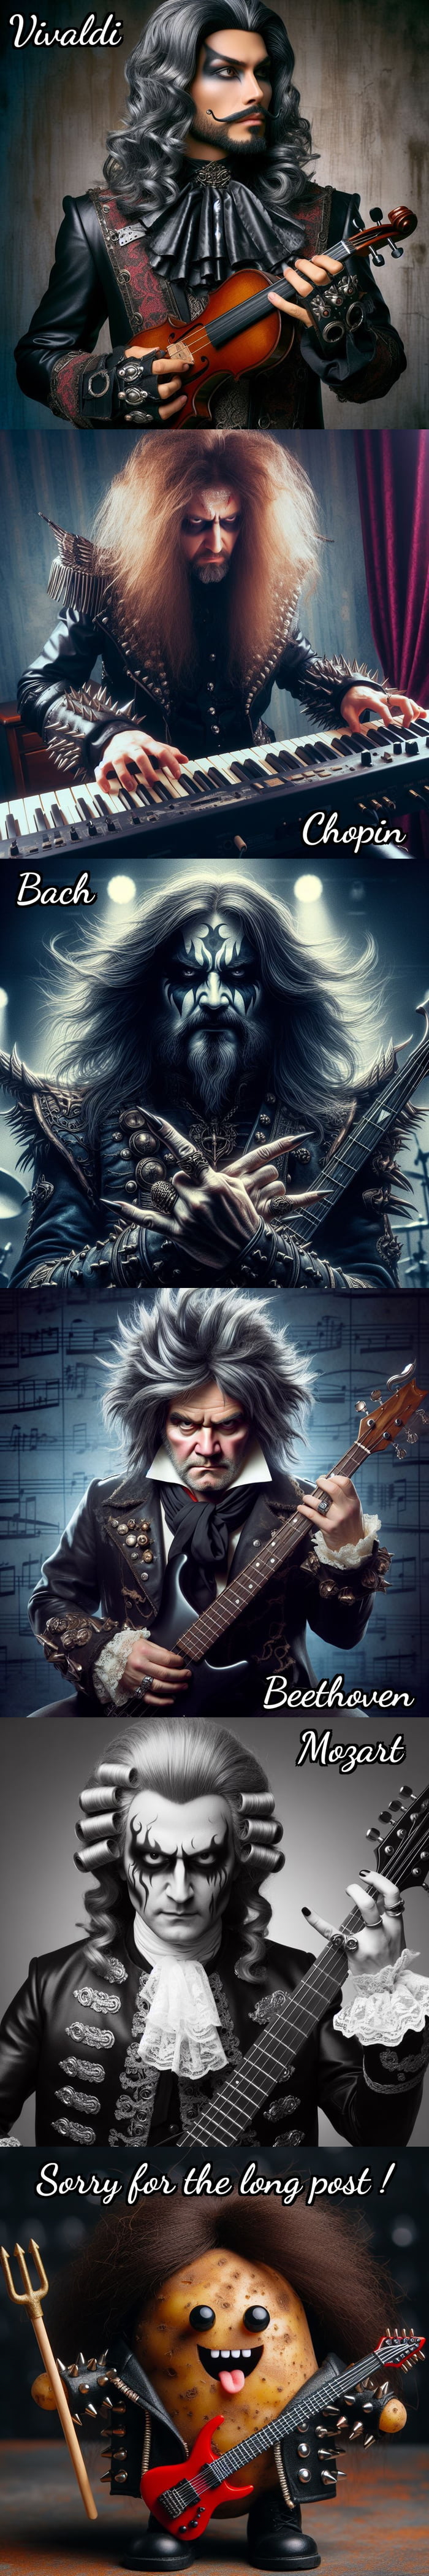 Classical composers as Metal artists.